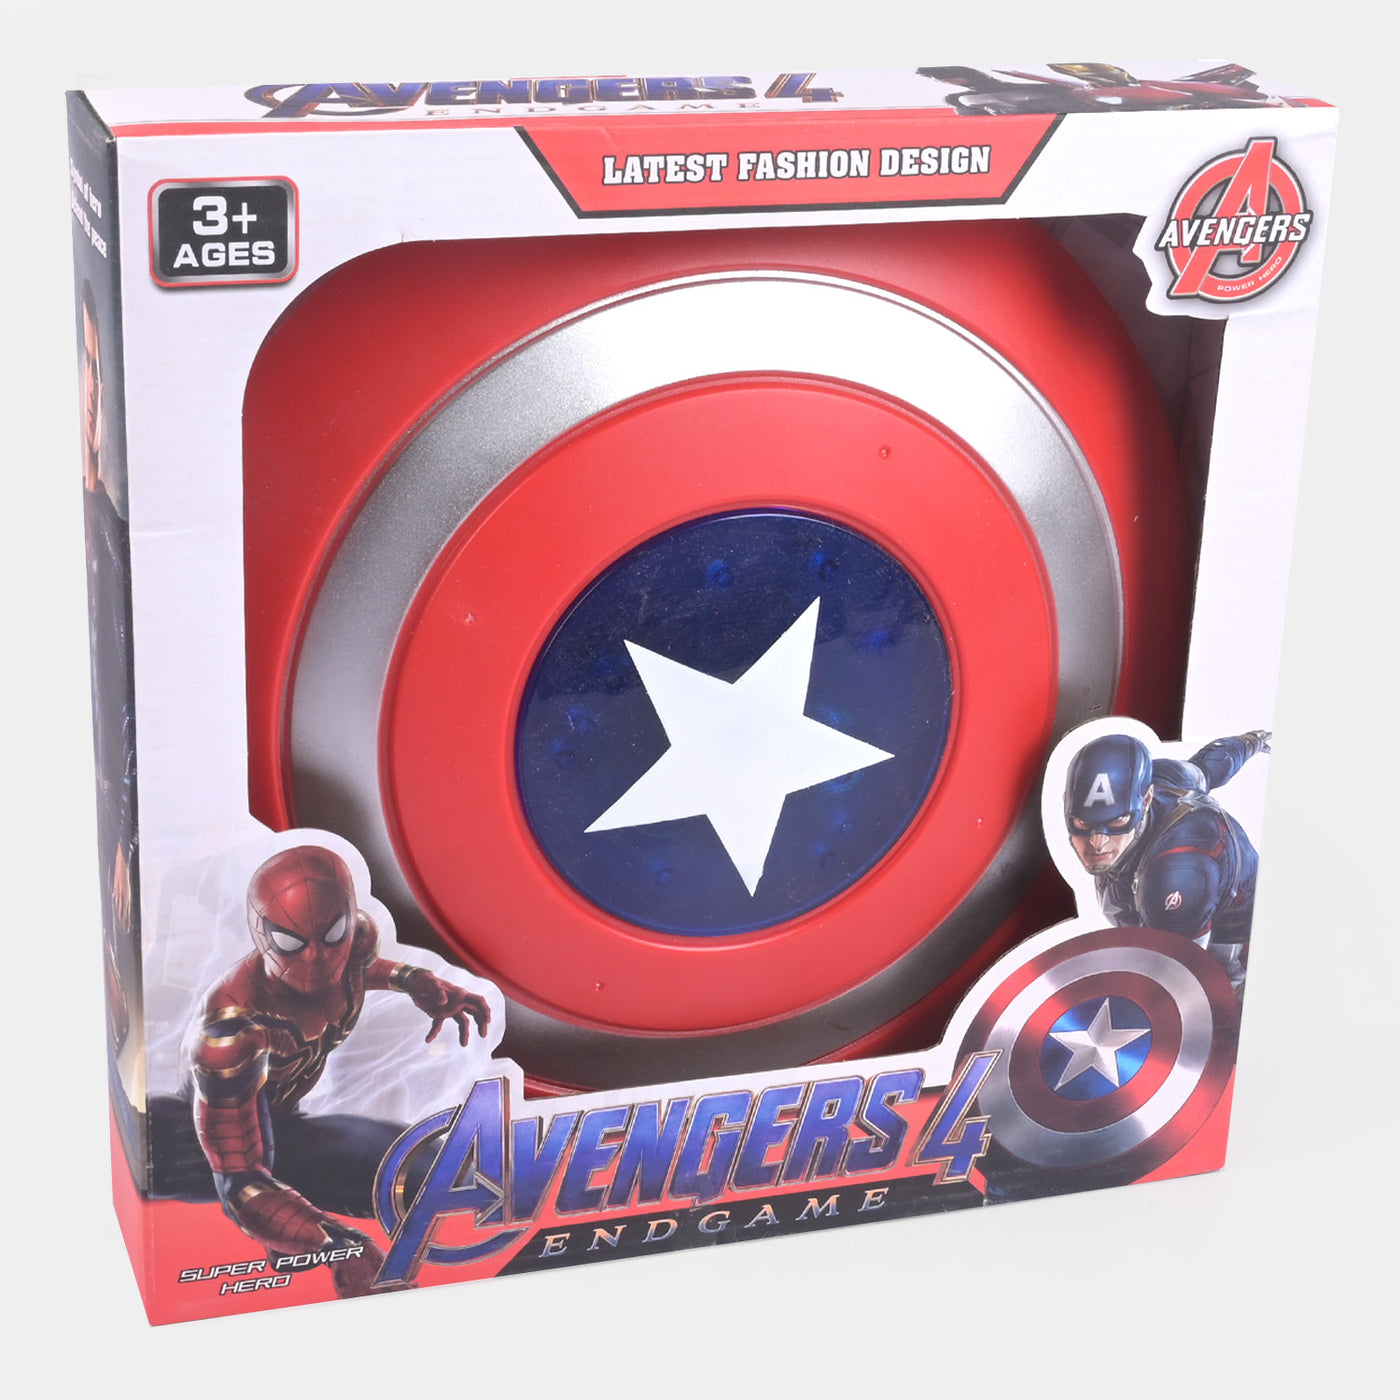 Action Hero Roleplay Shield With Light For Kids